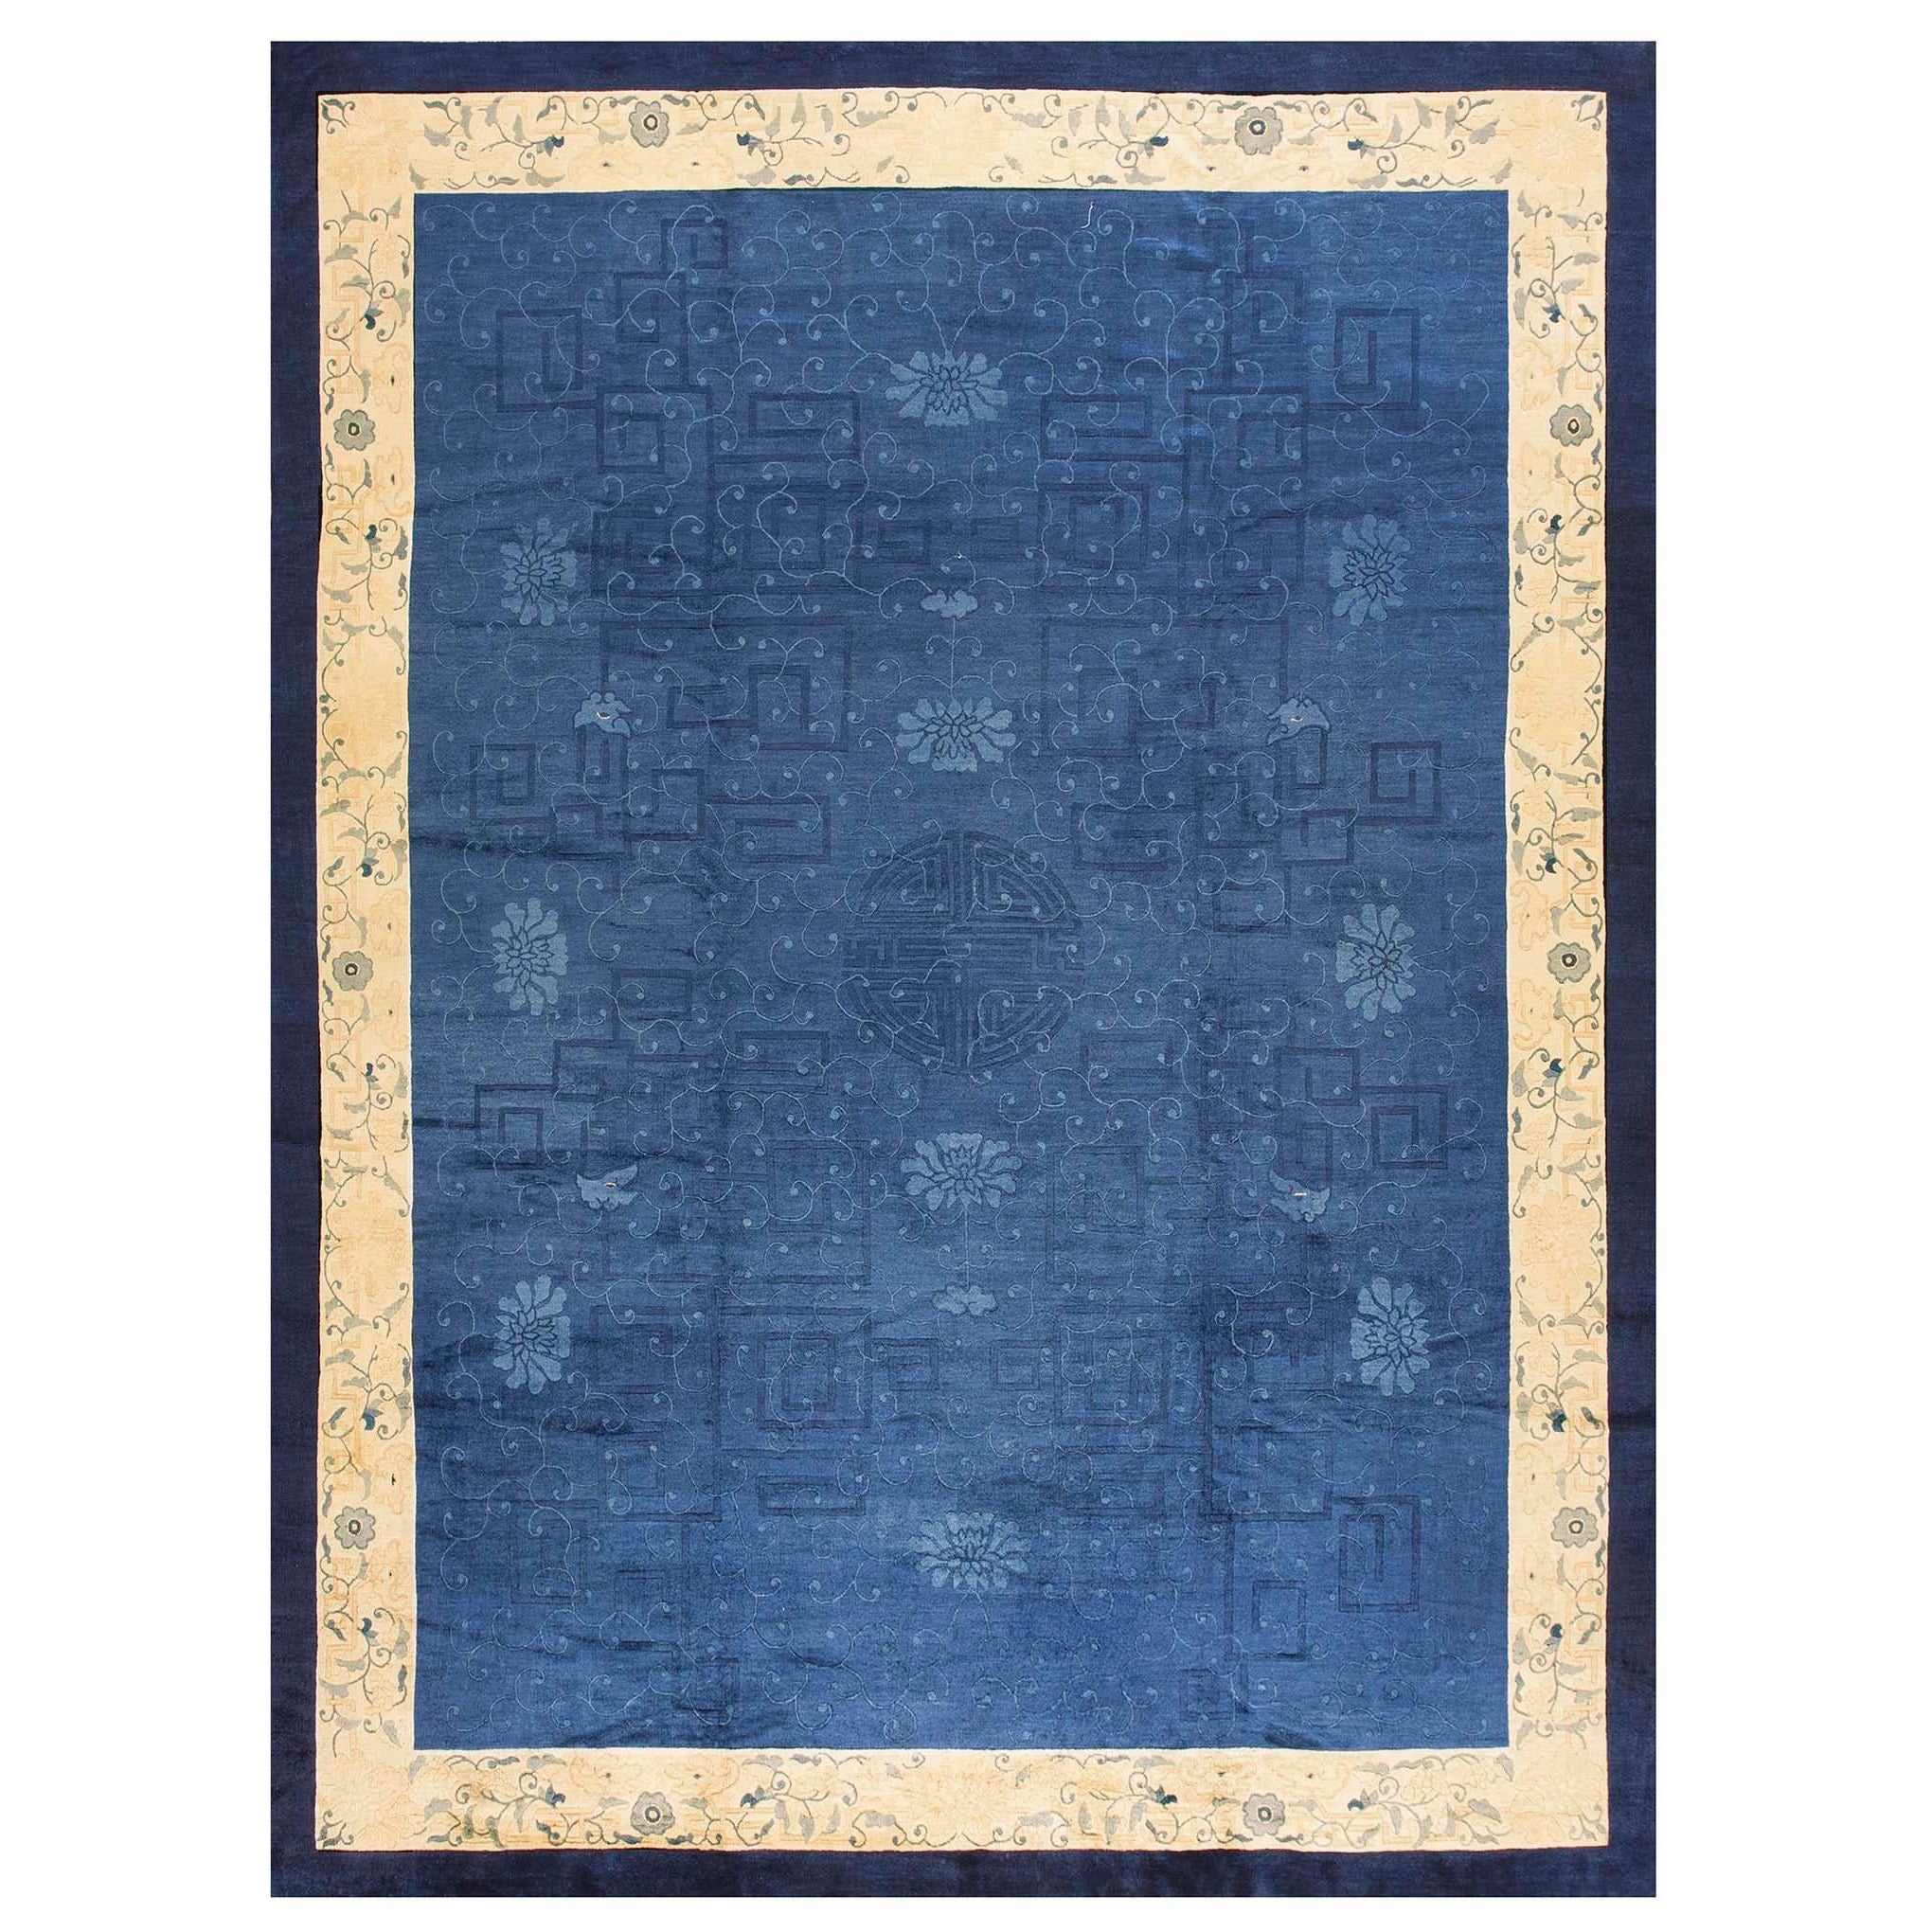 Late 19th Century Chinese Peking Carpet ( 9' x 11'8" - 275 x 355 cm )  For Sale